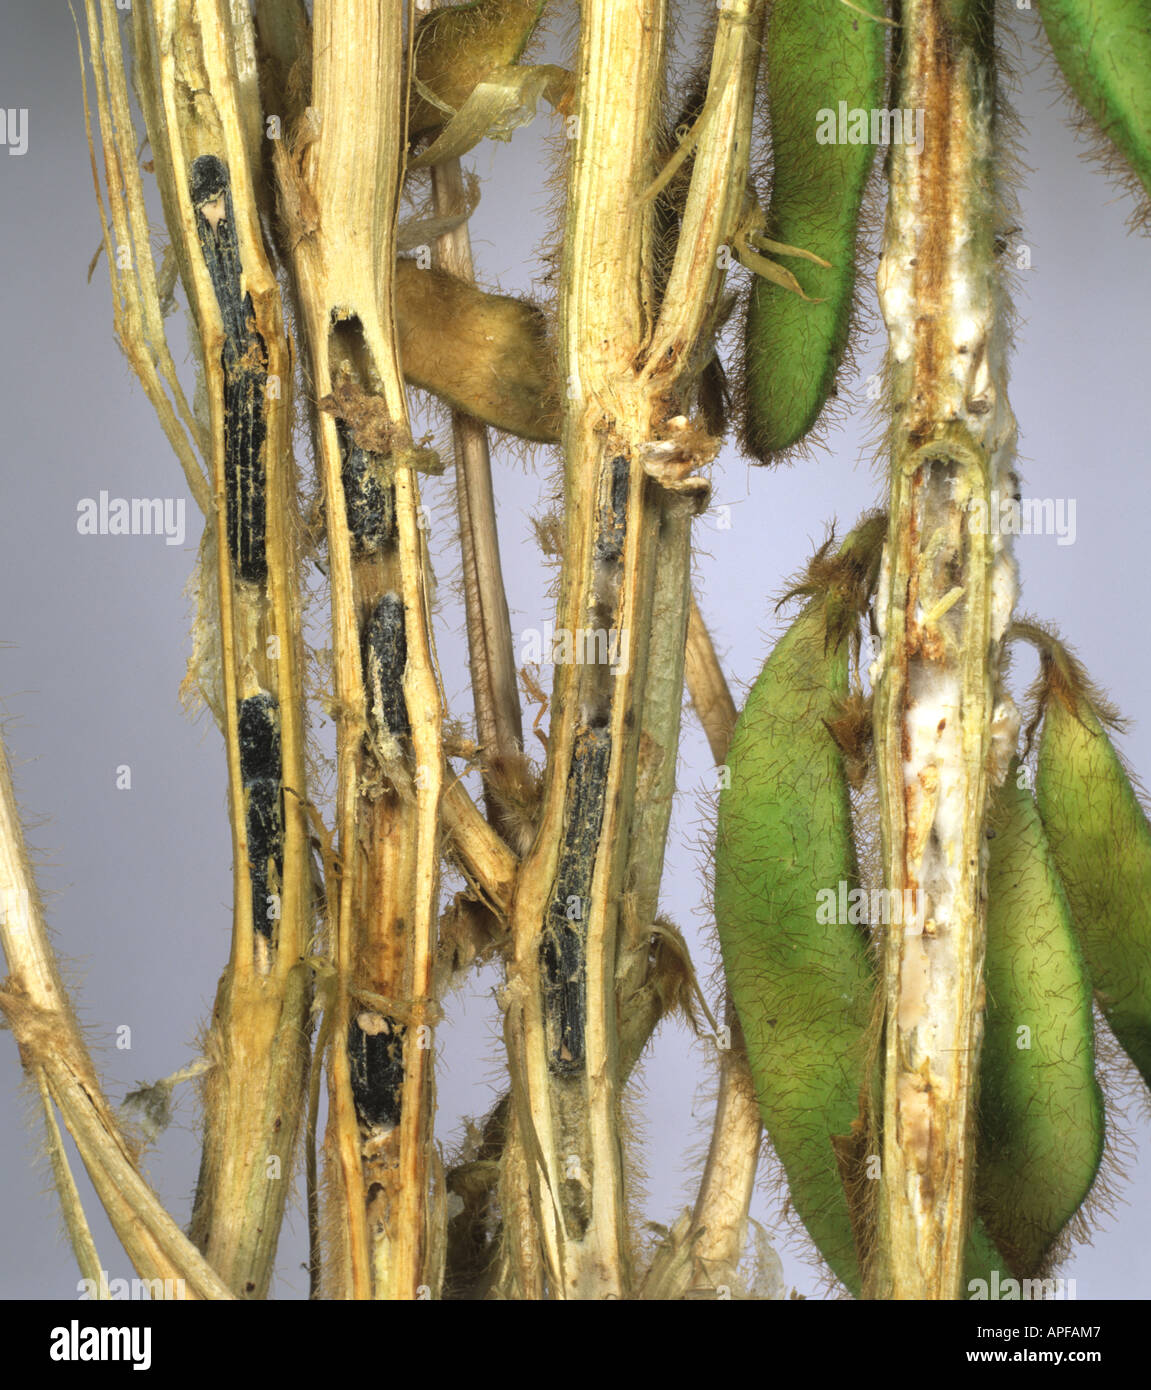 Stem rot Sclerotinia sclerotiorum sectioned soybean stem showing sclerotia Stock Photo